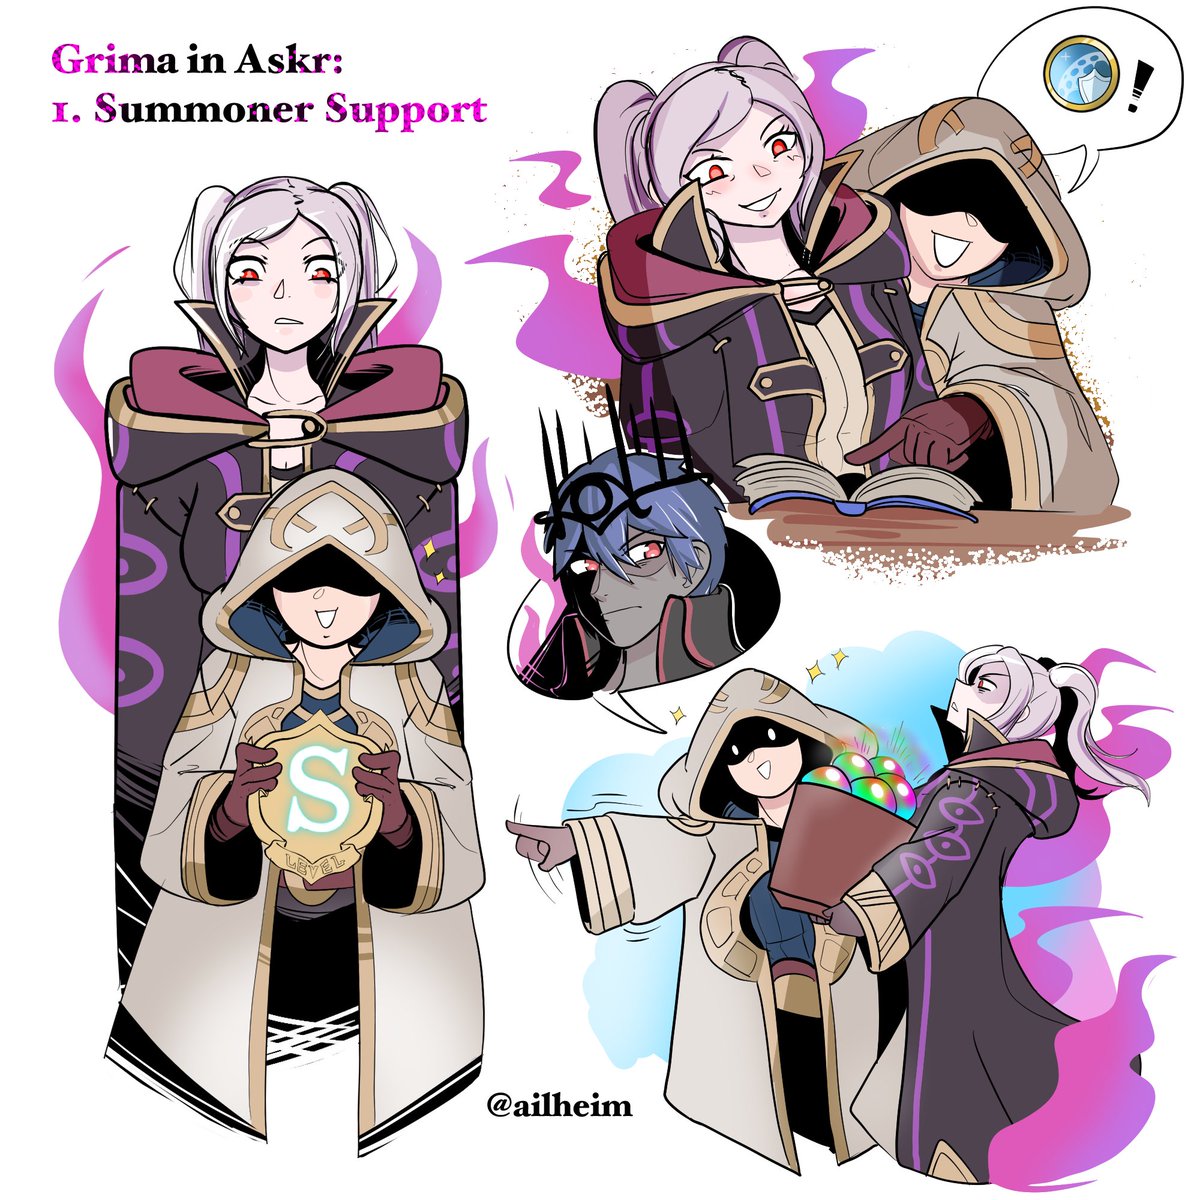 Grima in Askr: a doodle collection (1/5)
#FireEmblem #FEHeroes #fanart